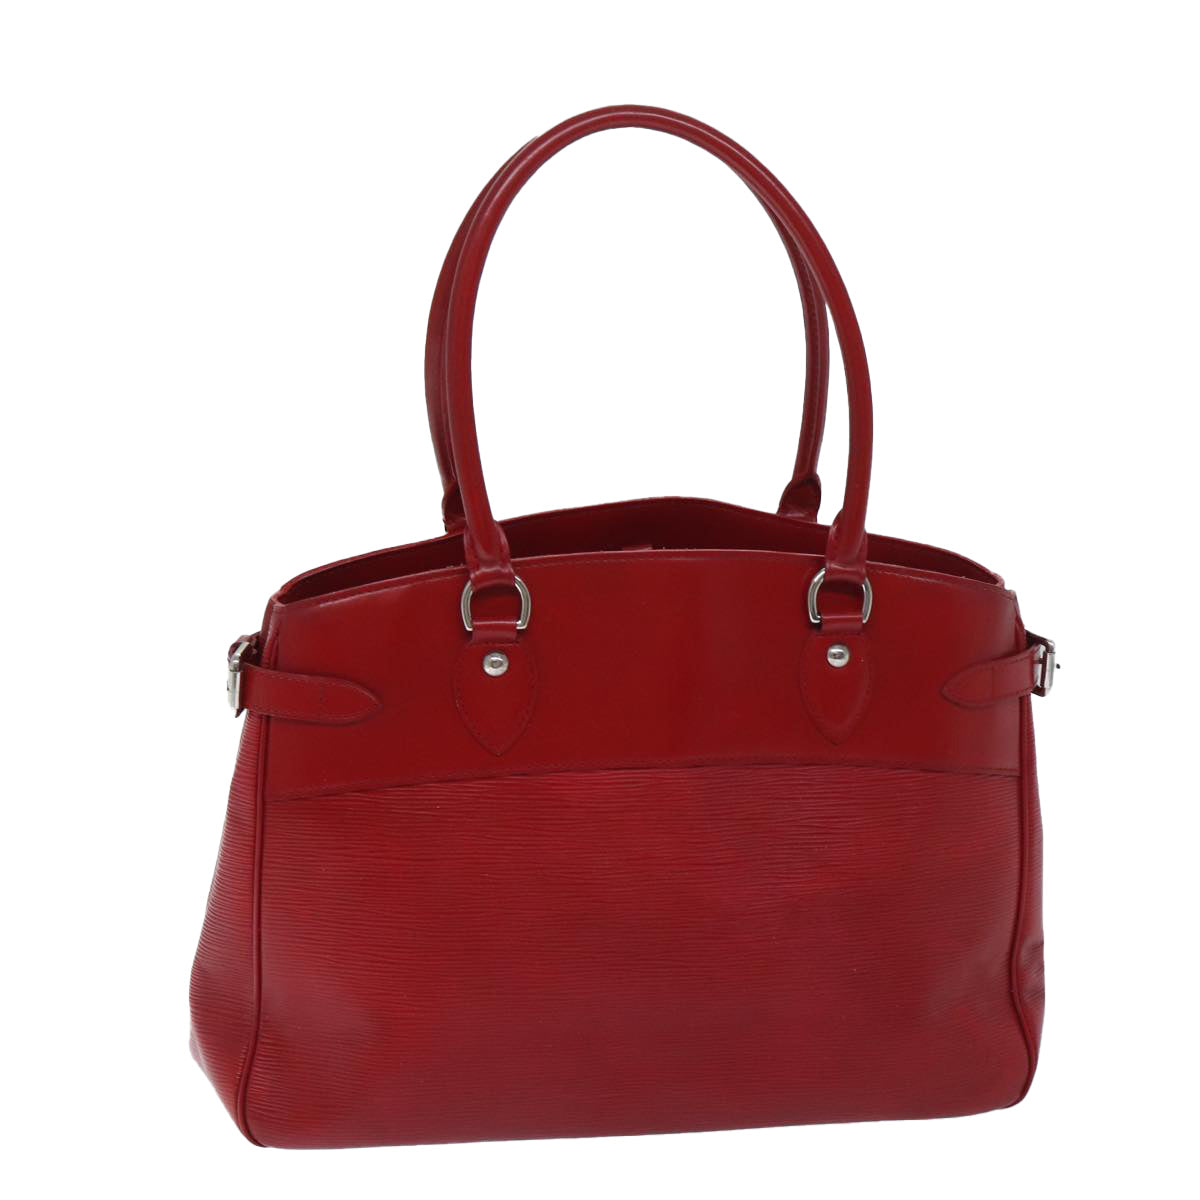 LOUIS VUITTON Epi Passy GM Hand Bag Red M59252 LV Auth bs13221